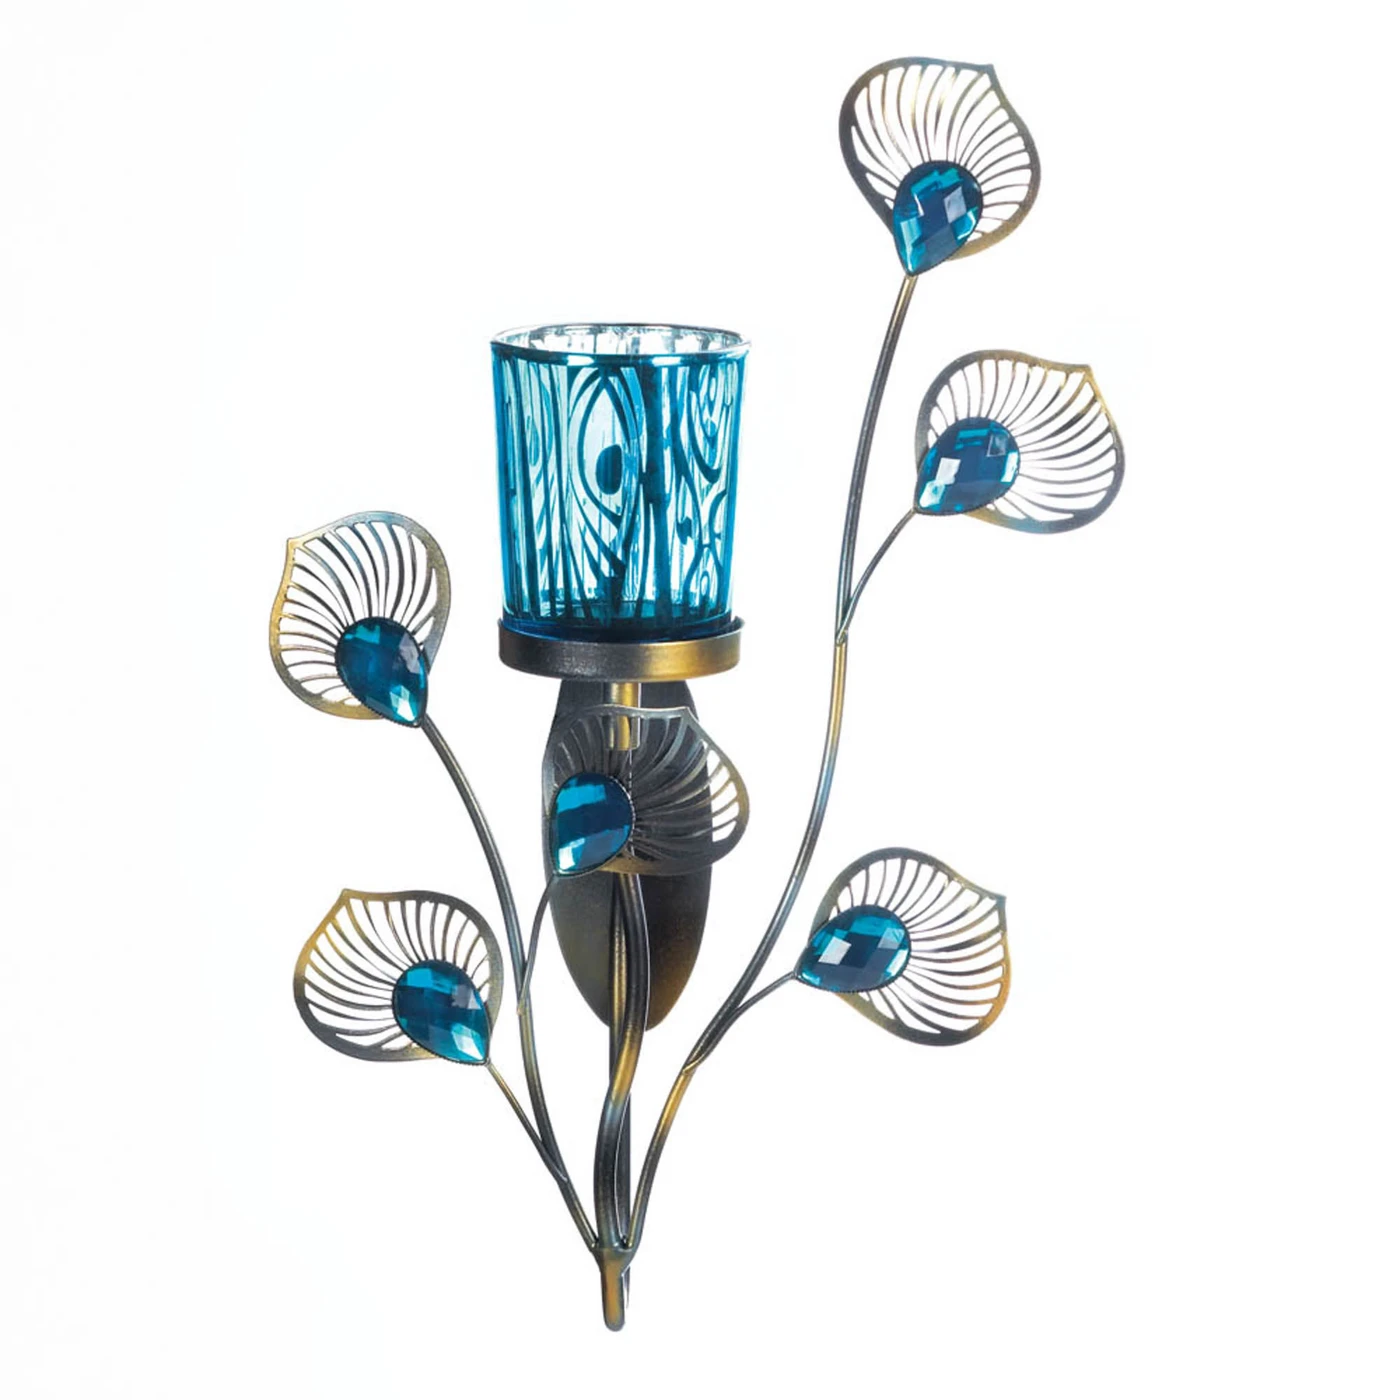 Peacock Inspired Single Sconce - $26.40